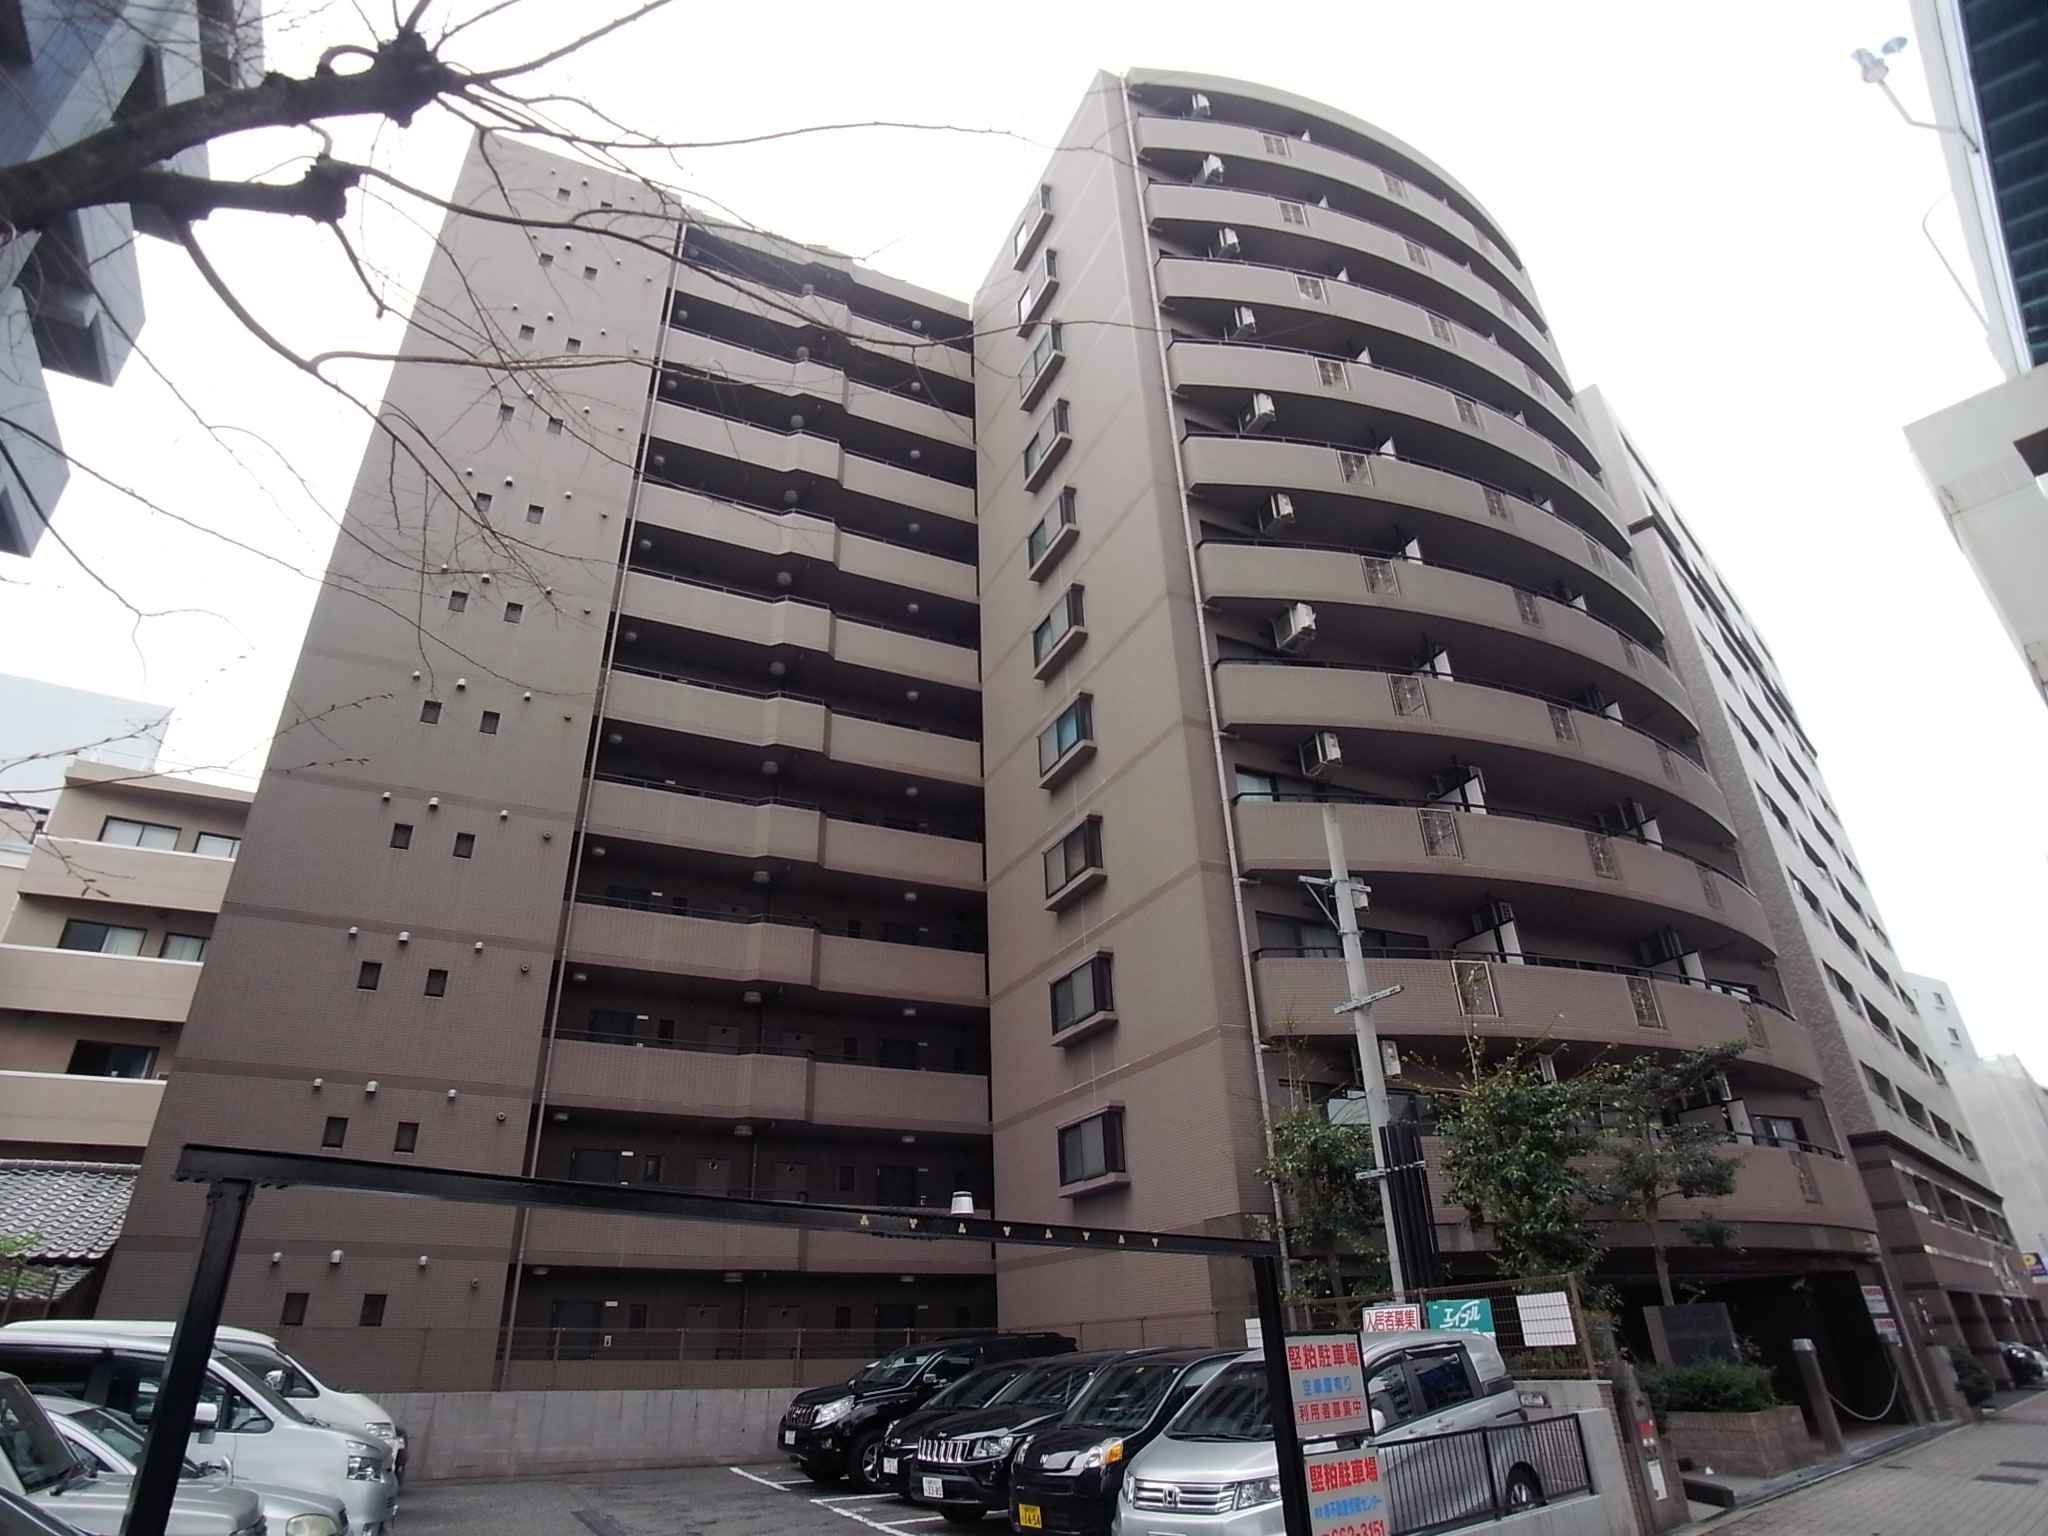 Building appearance. It is within walking distance of Hakata Station!